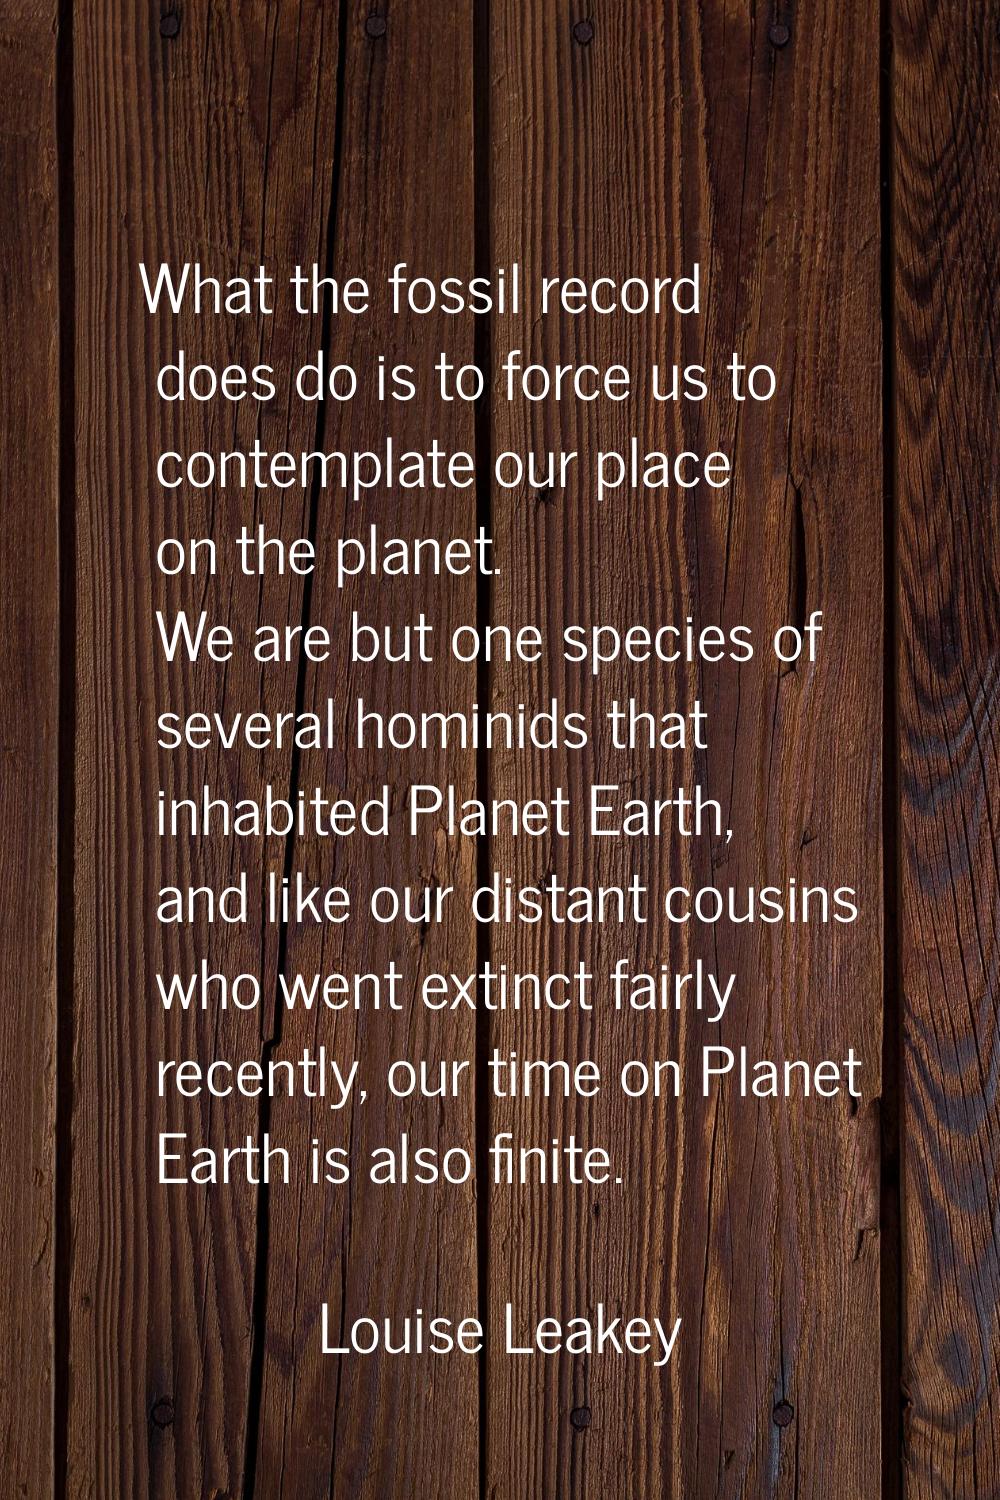 What the fossil record does do is to force us to contemplate our place on the planet. We are but on